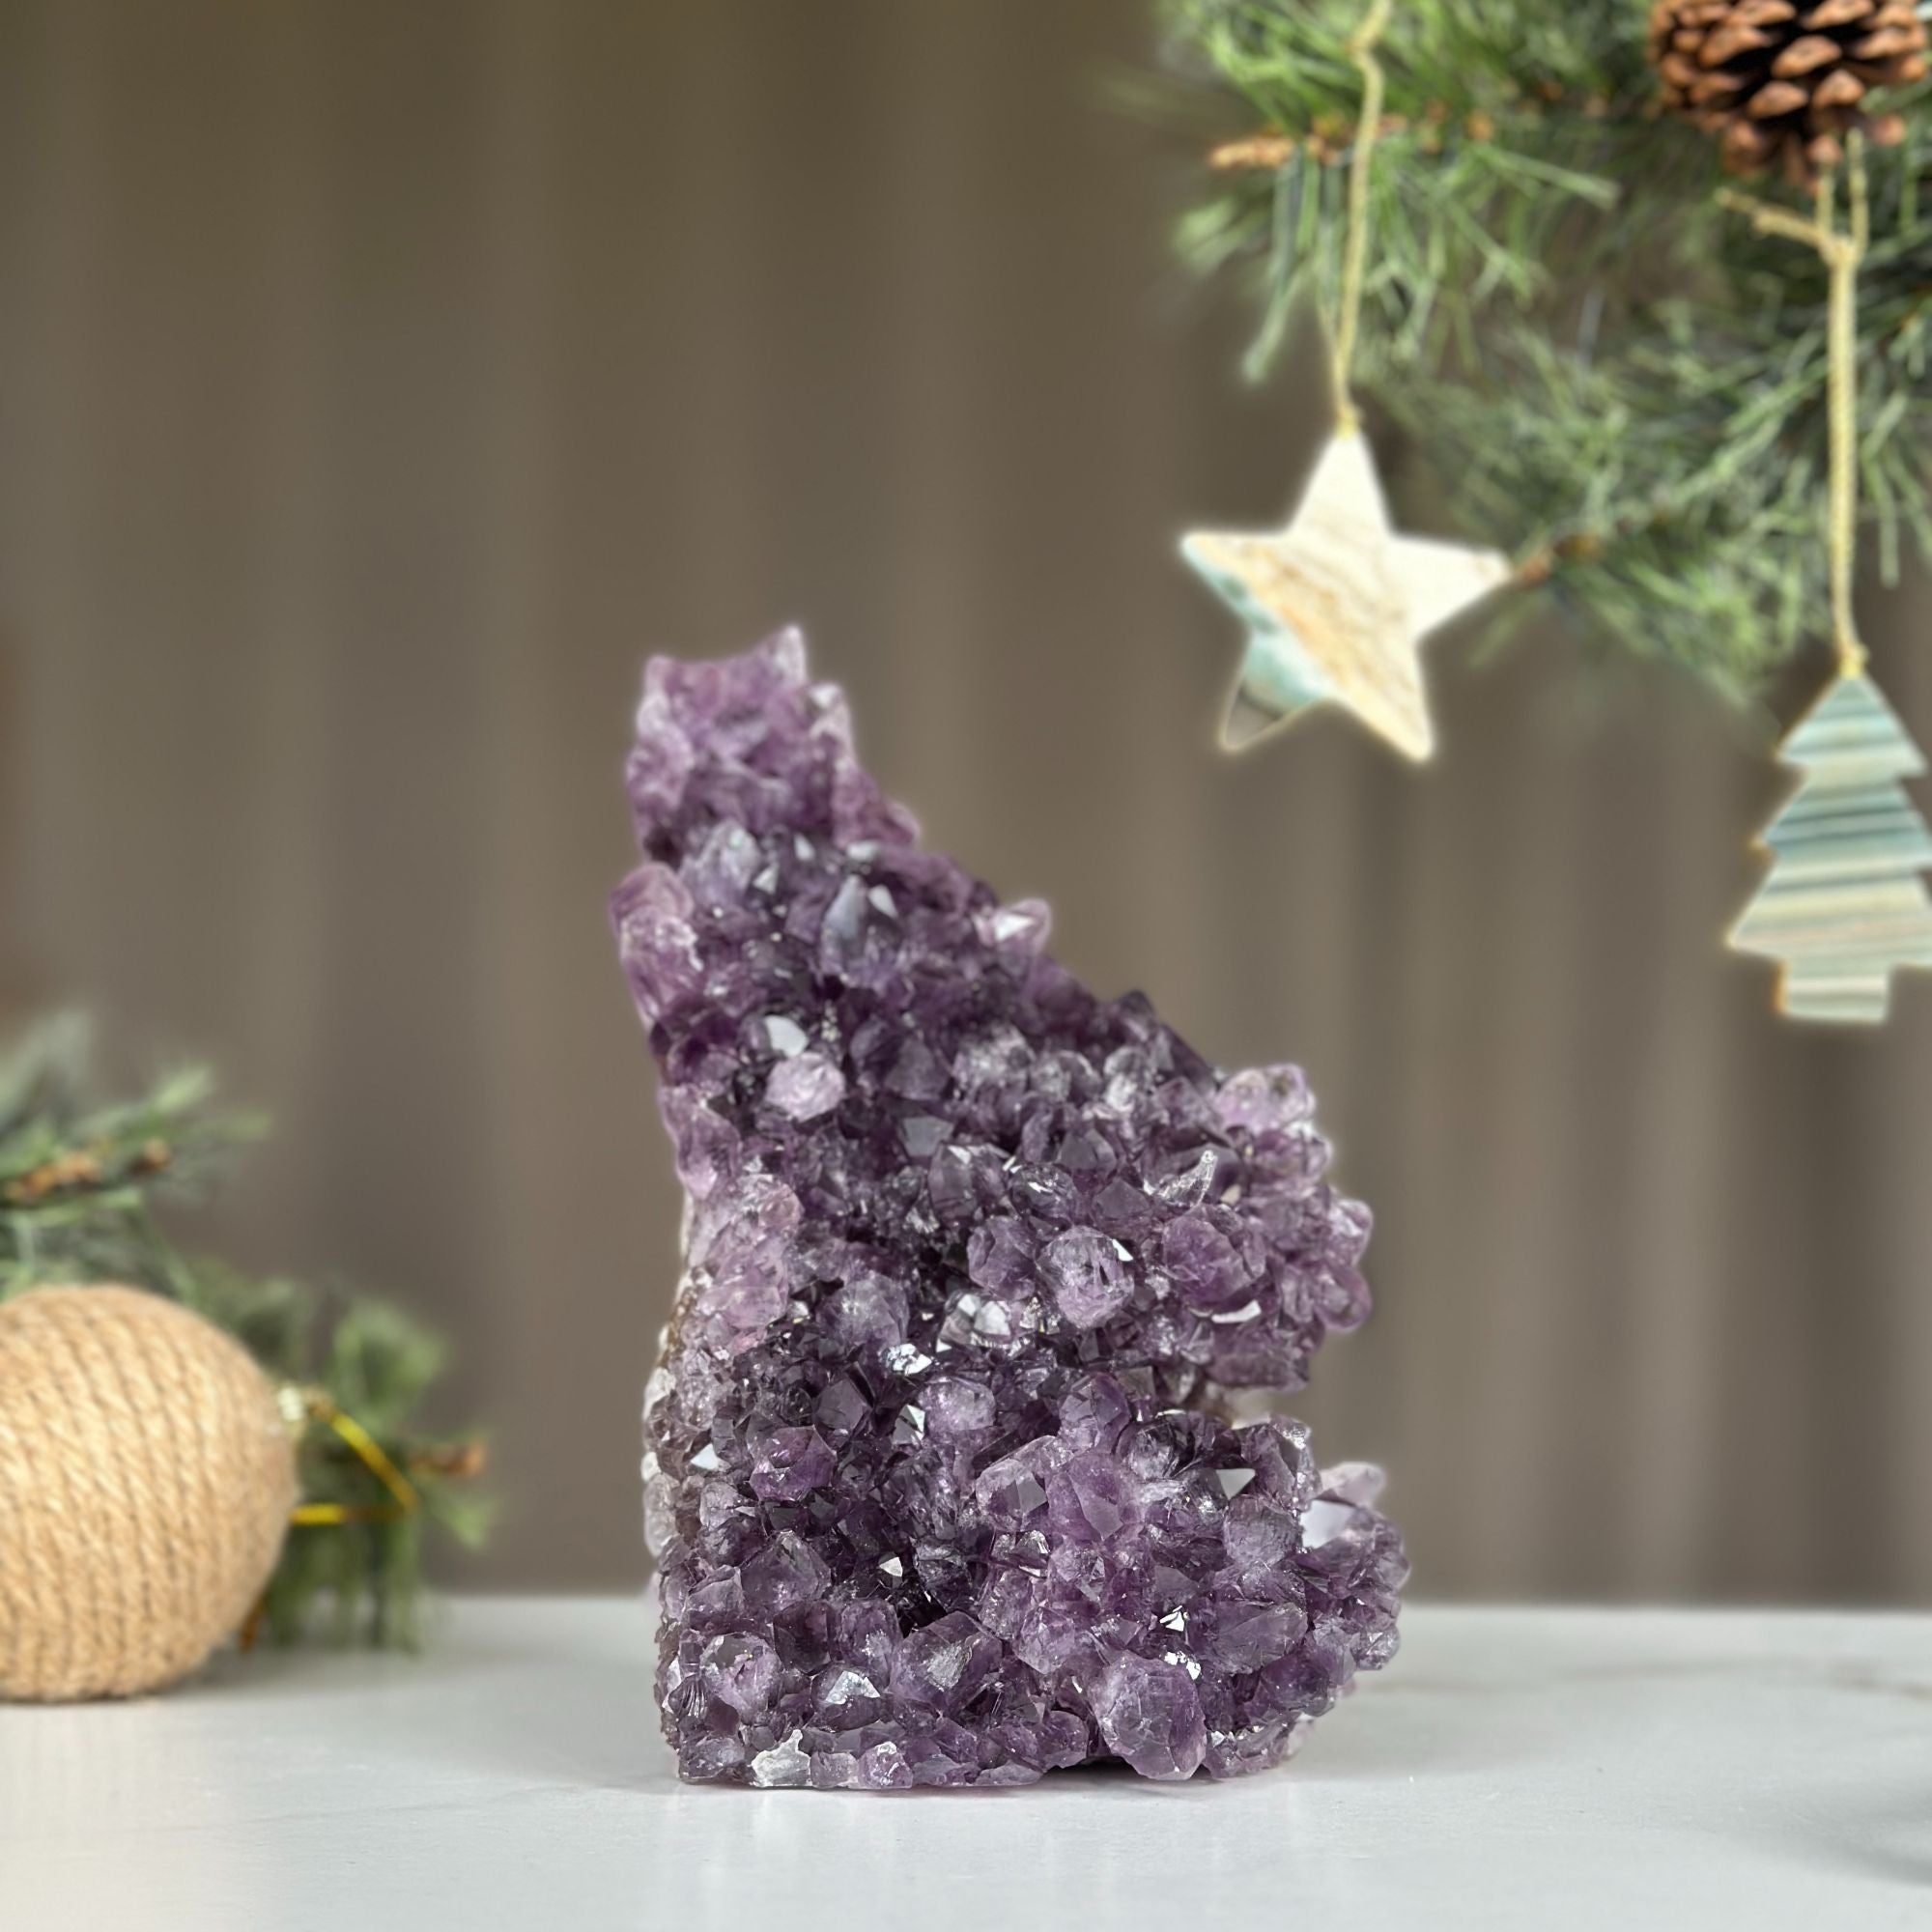 Extra Large Amethyst, Crystal Cluster With Cut Base, 6 to 7 inches amethyst